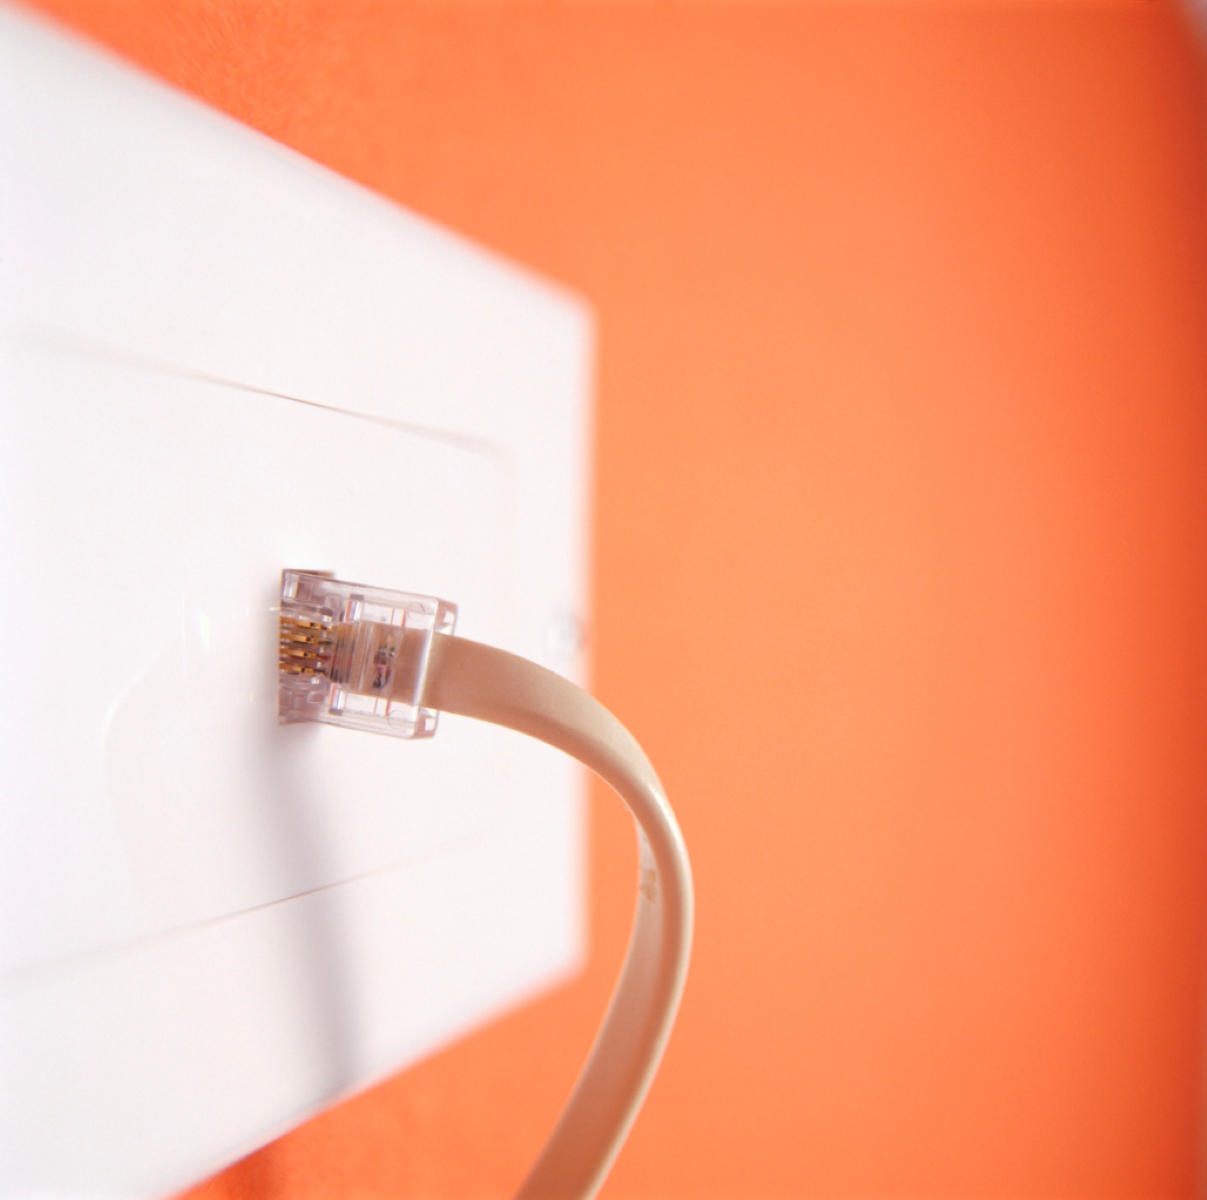 how-to-test-ethernet-port-in-wall